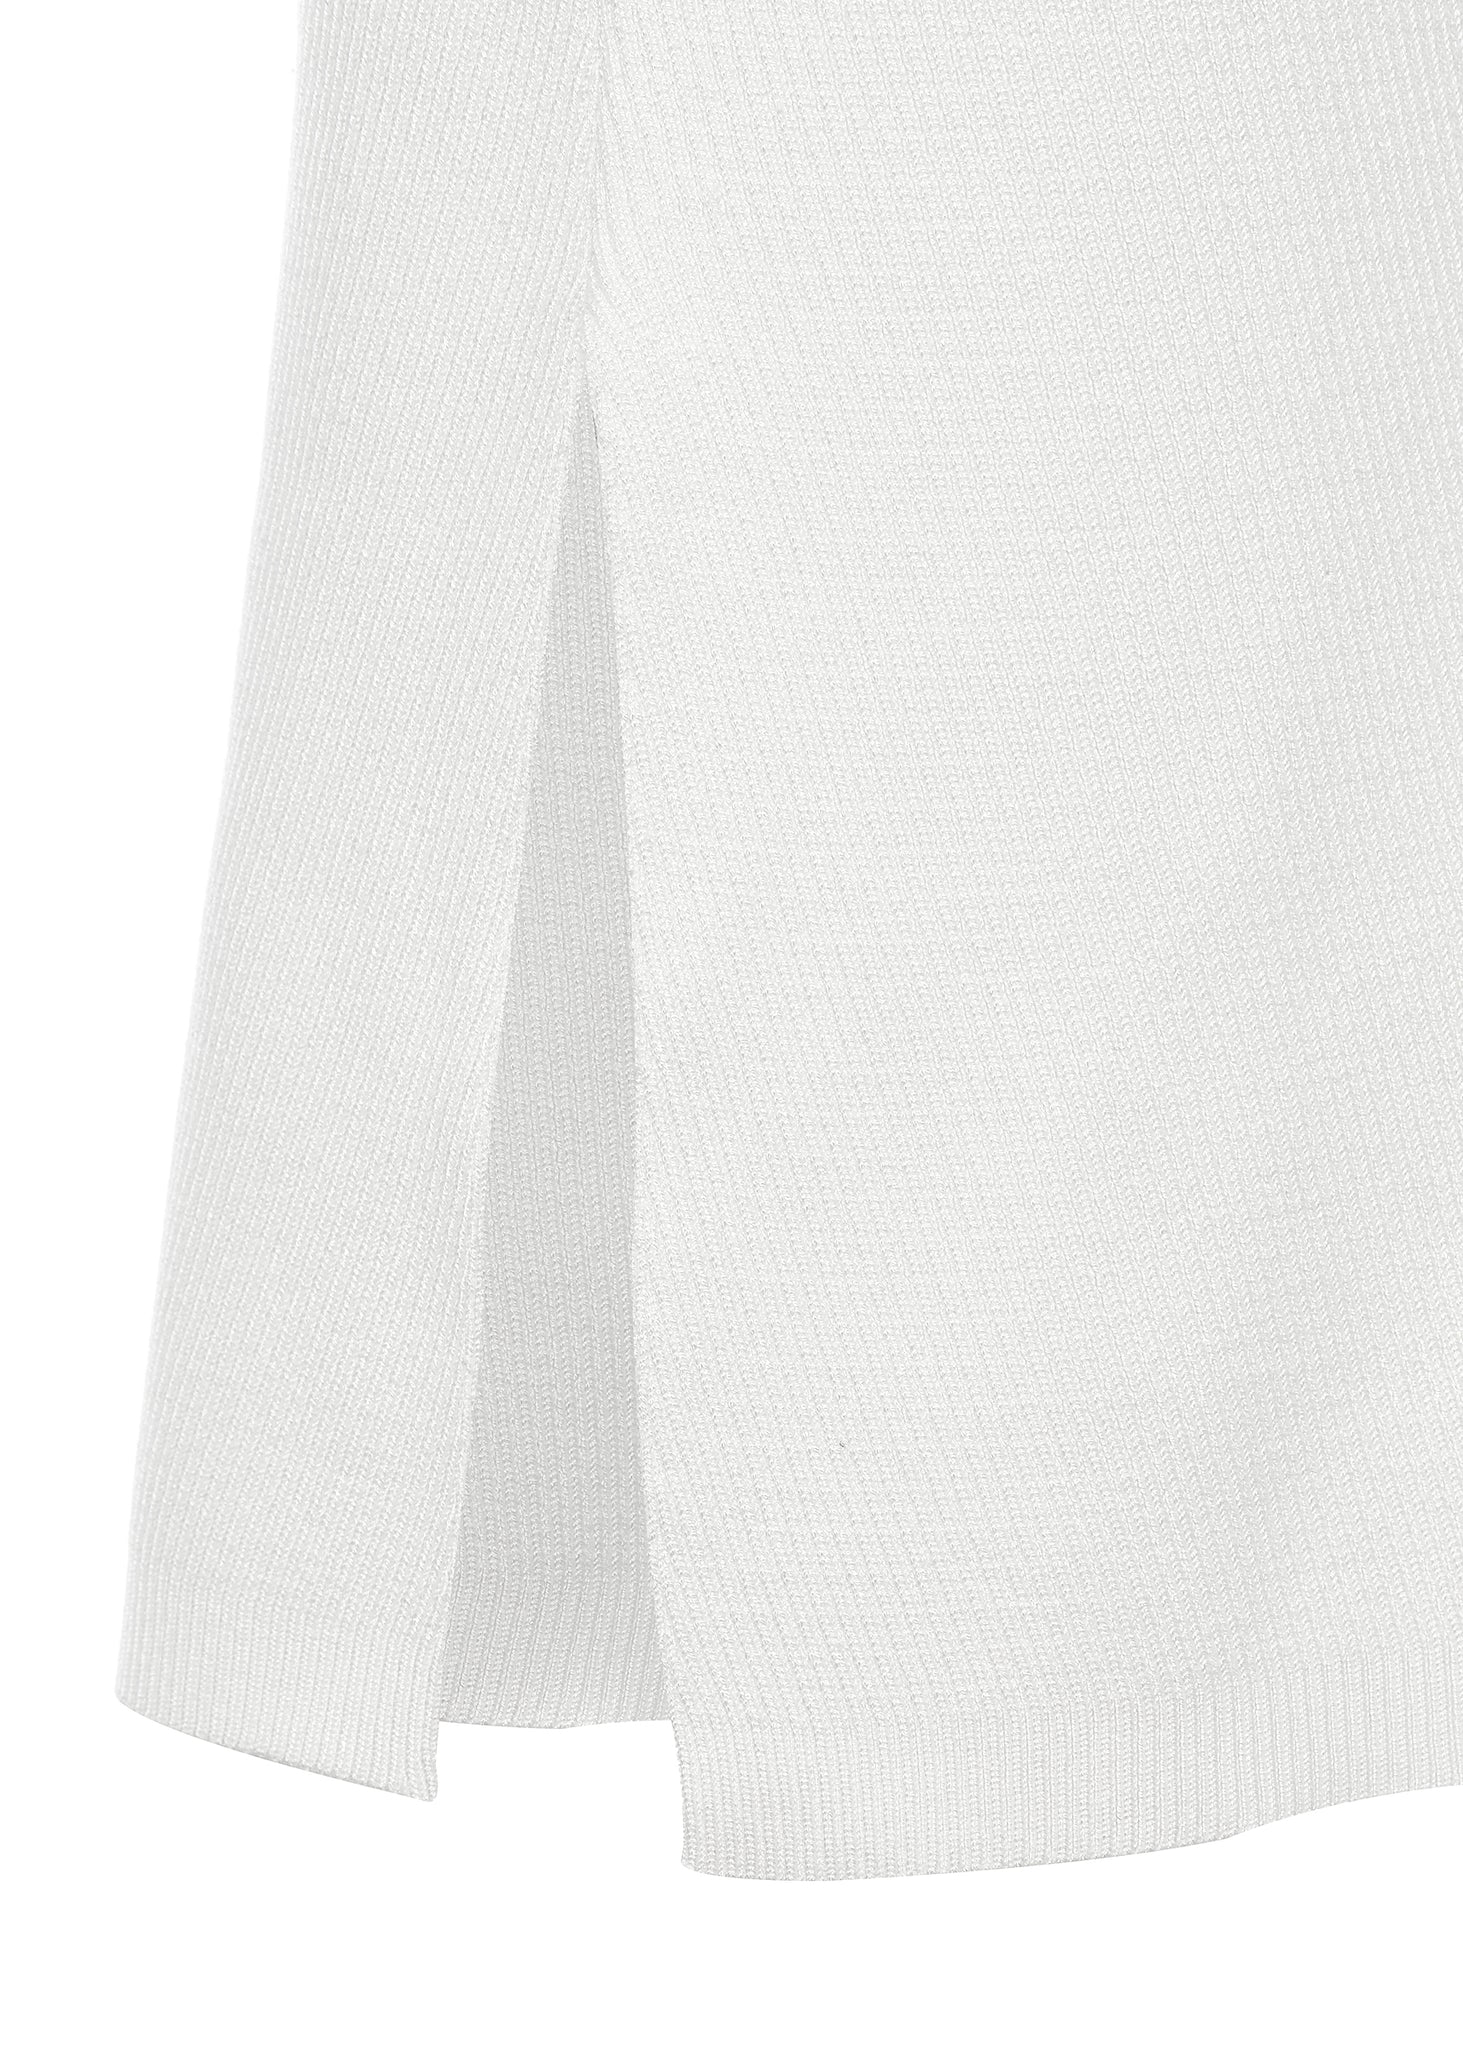 detail shot of slit on womens ribbed white v neck midi length dress with gold buttons 